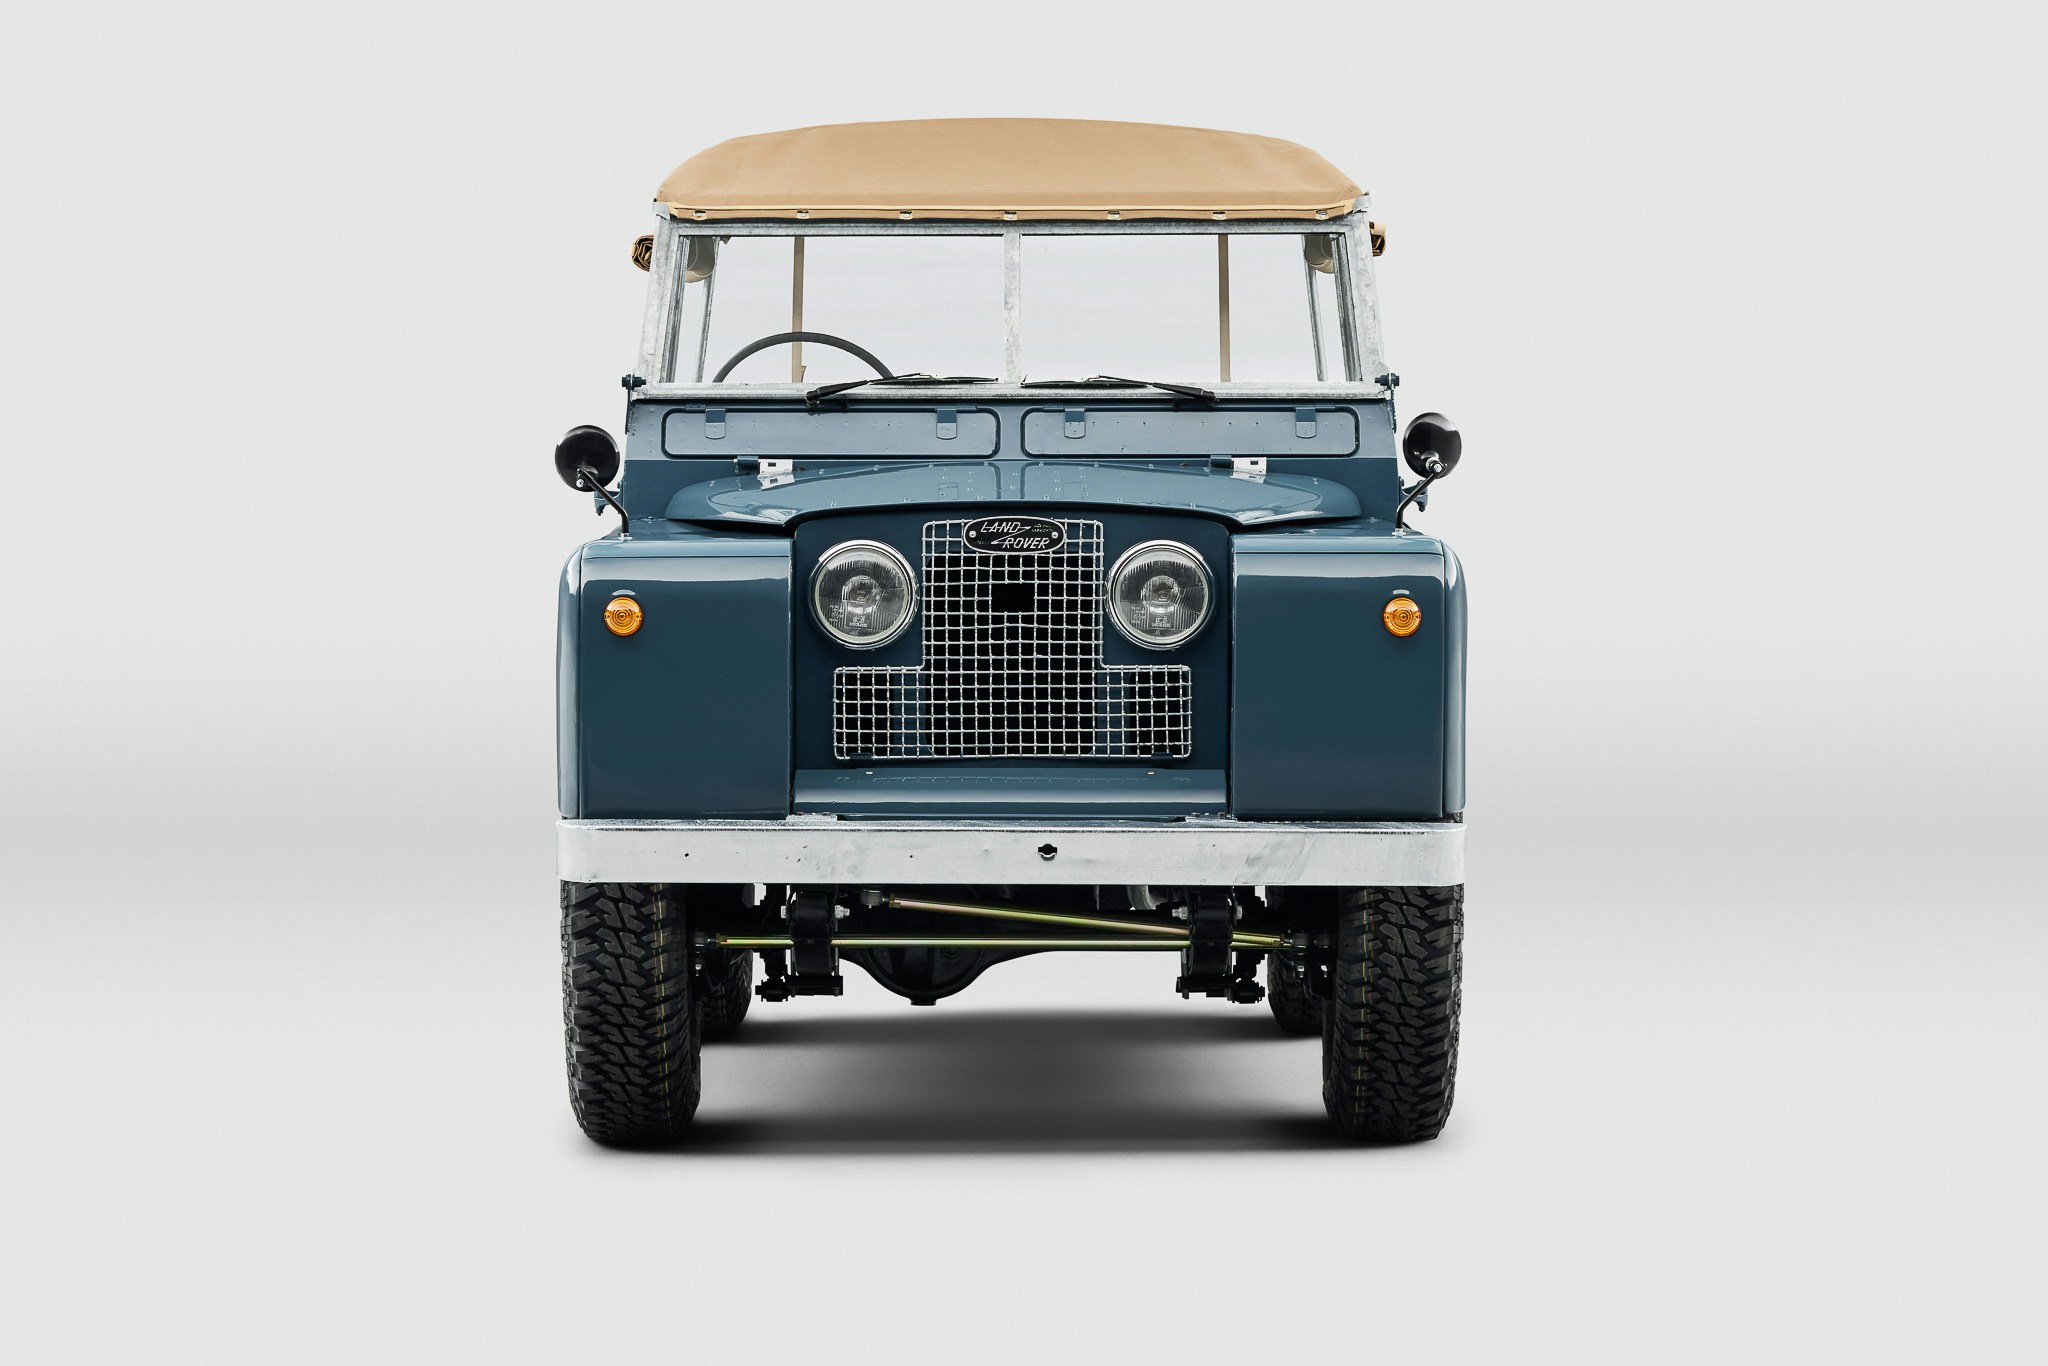 1970 Land Rover Series IIA 88 for sale by classified listing